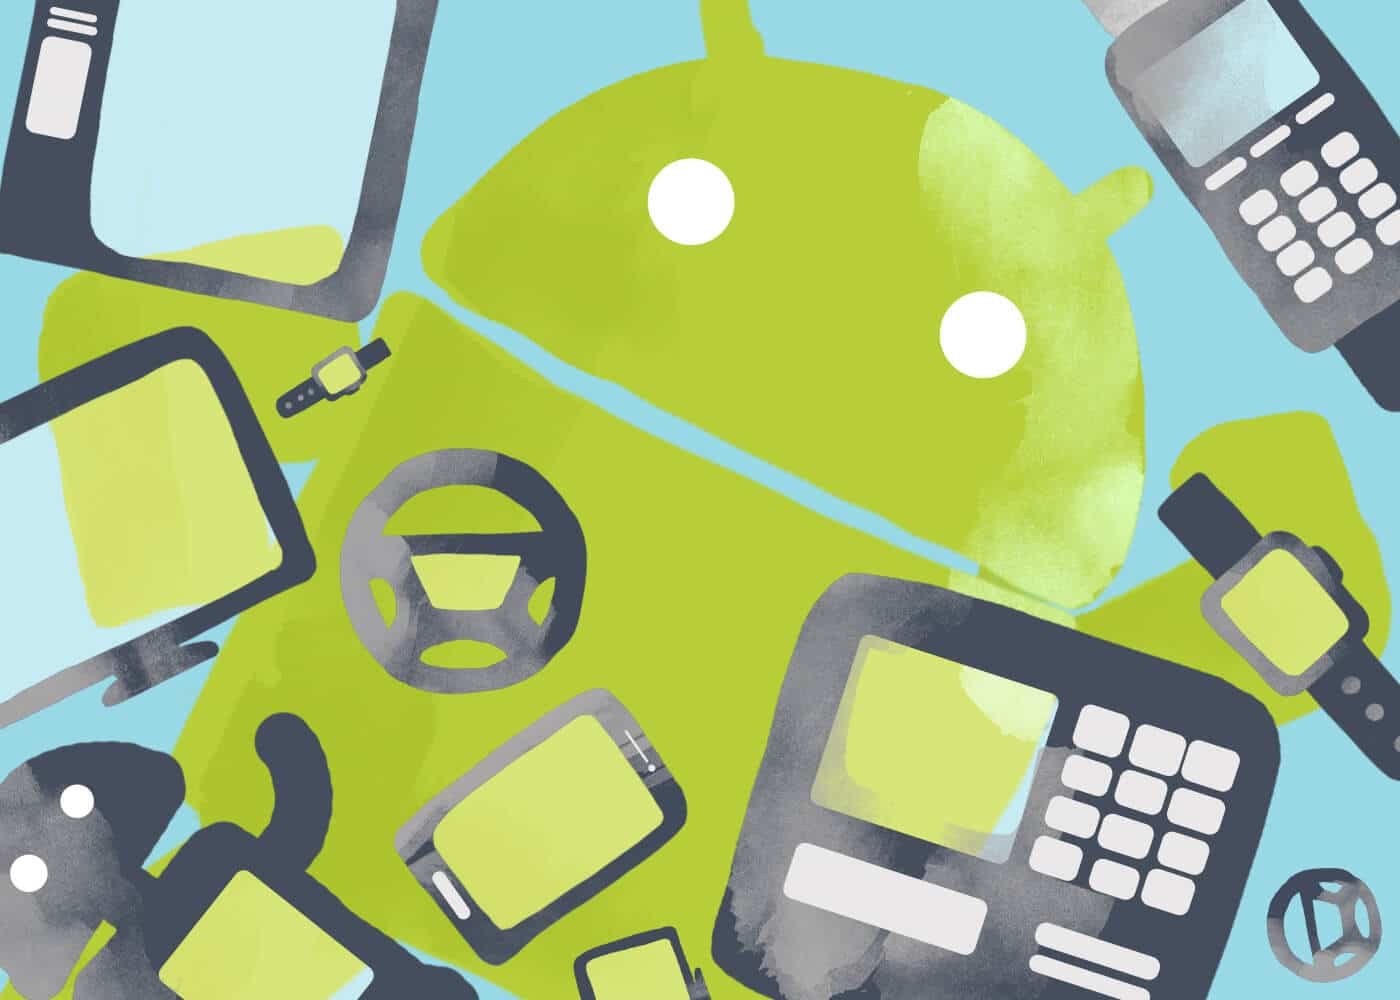 kursus android, kursus android jakarta, kursus android developer, pelatihan android, kursus aplikasi android